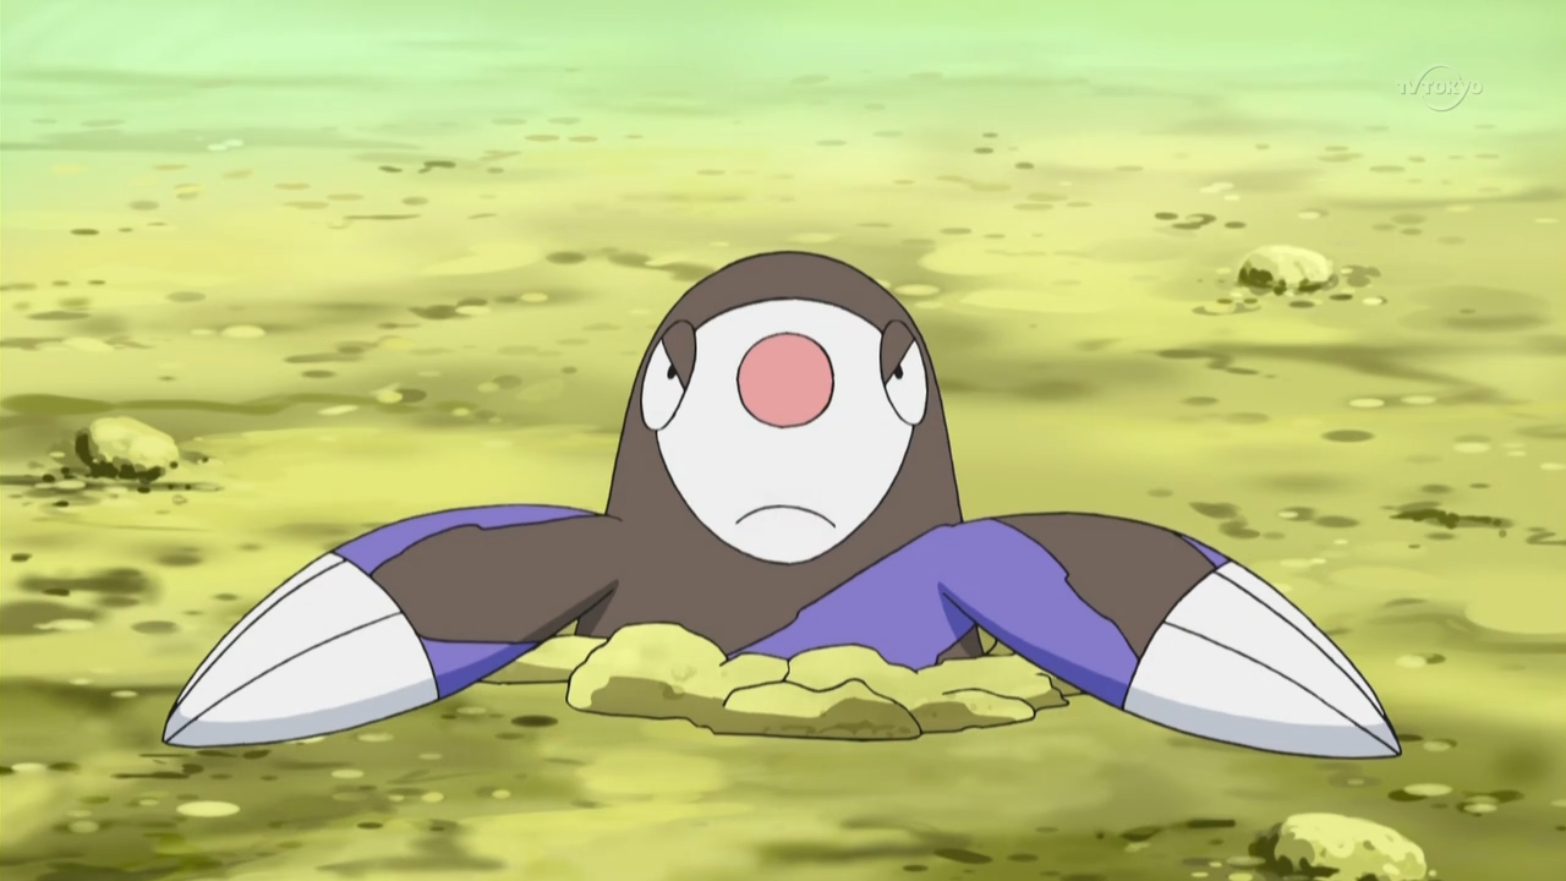 drilbur poking out of the ground and frowning in the pokemon anime